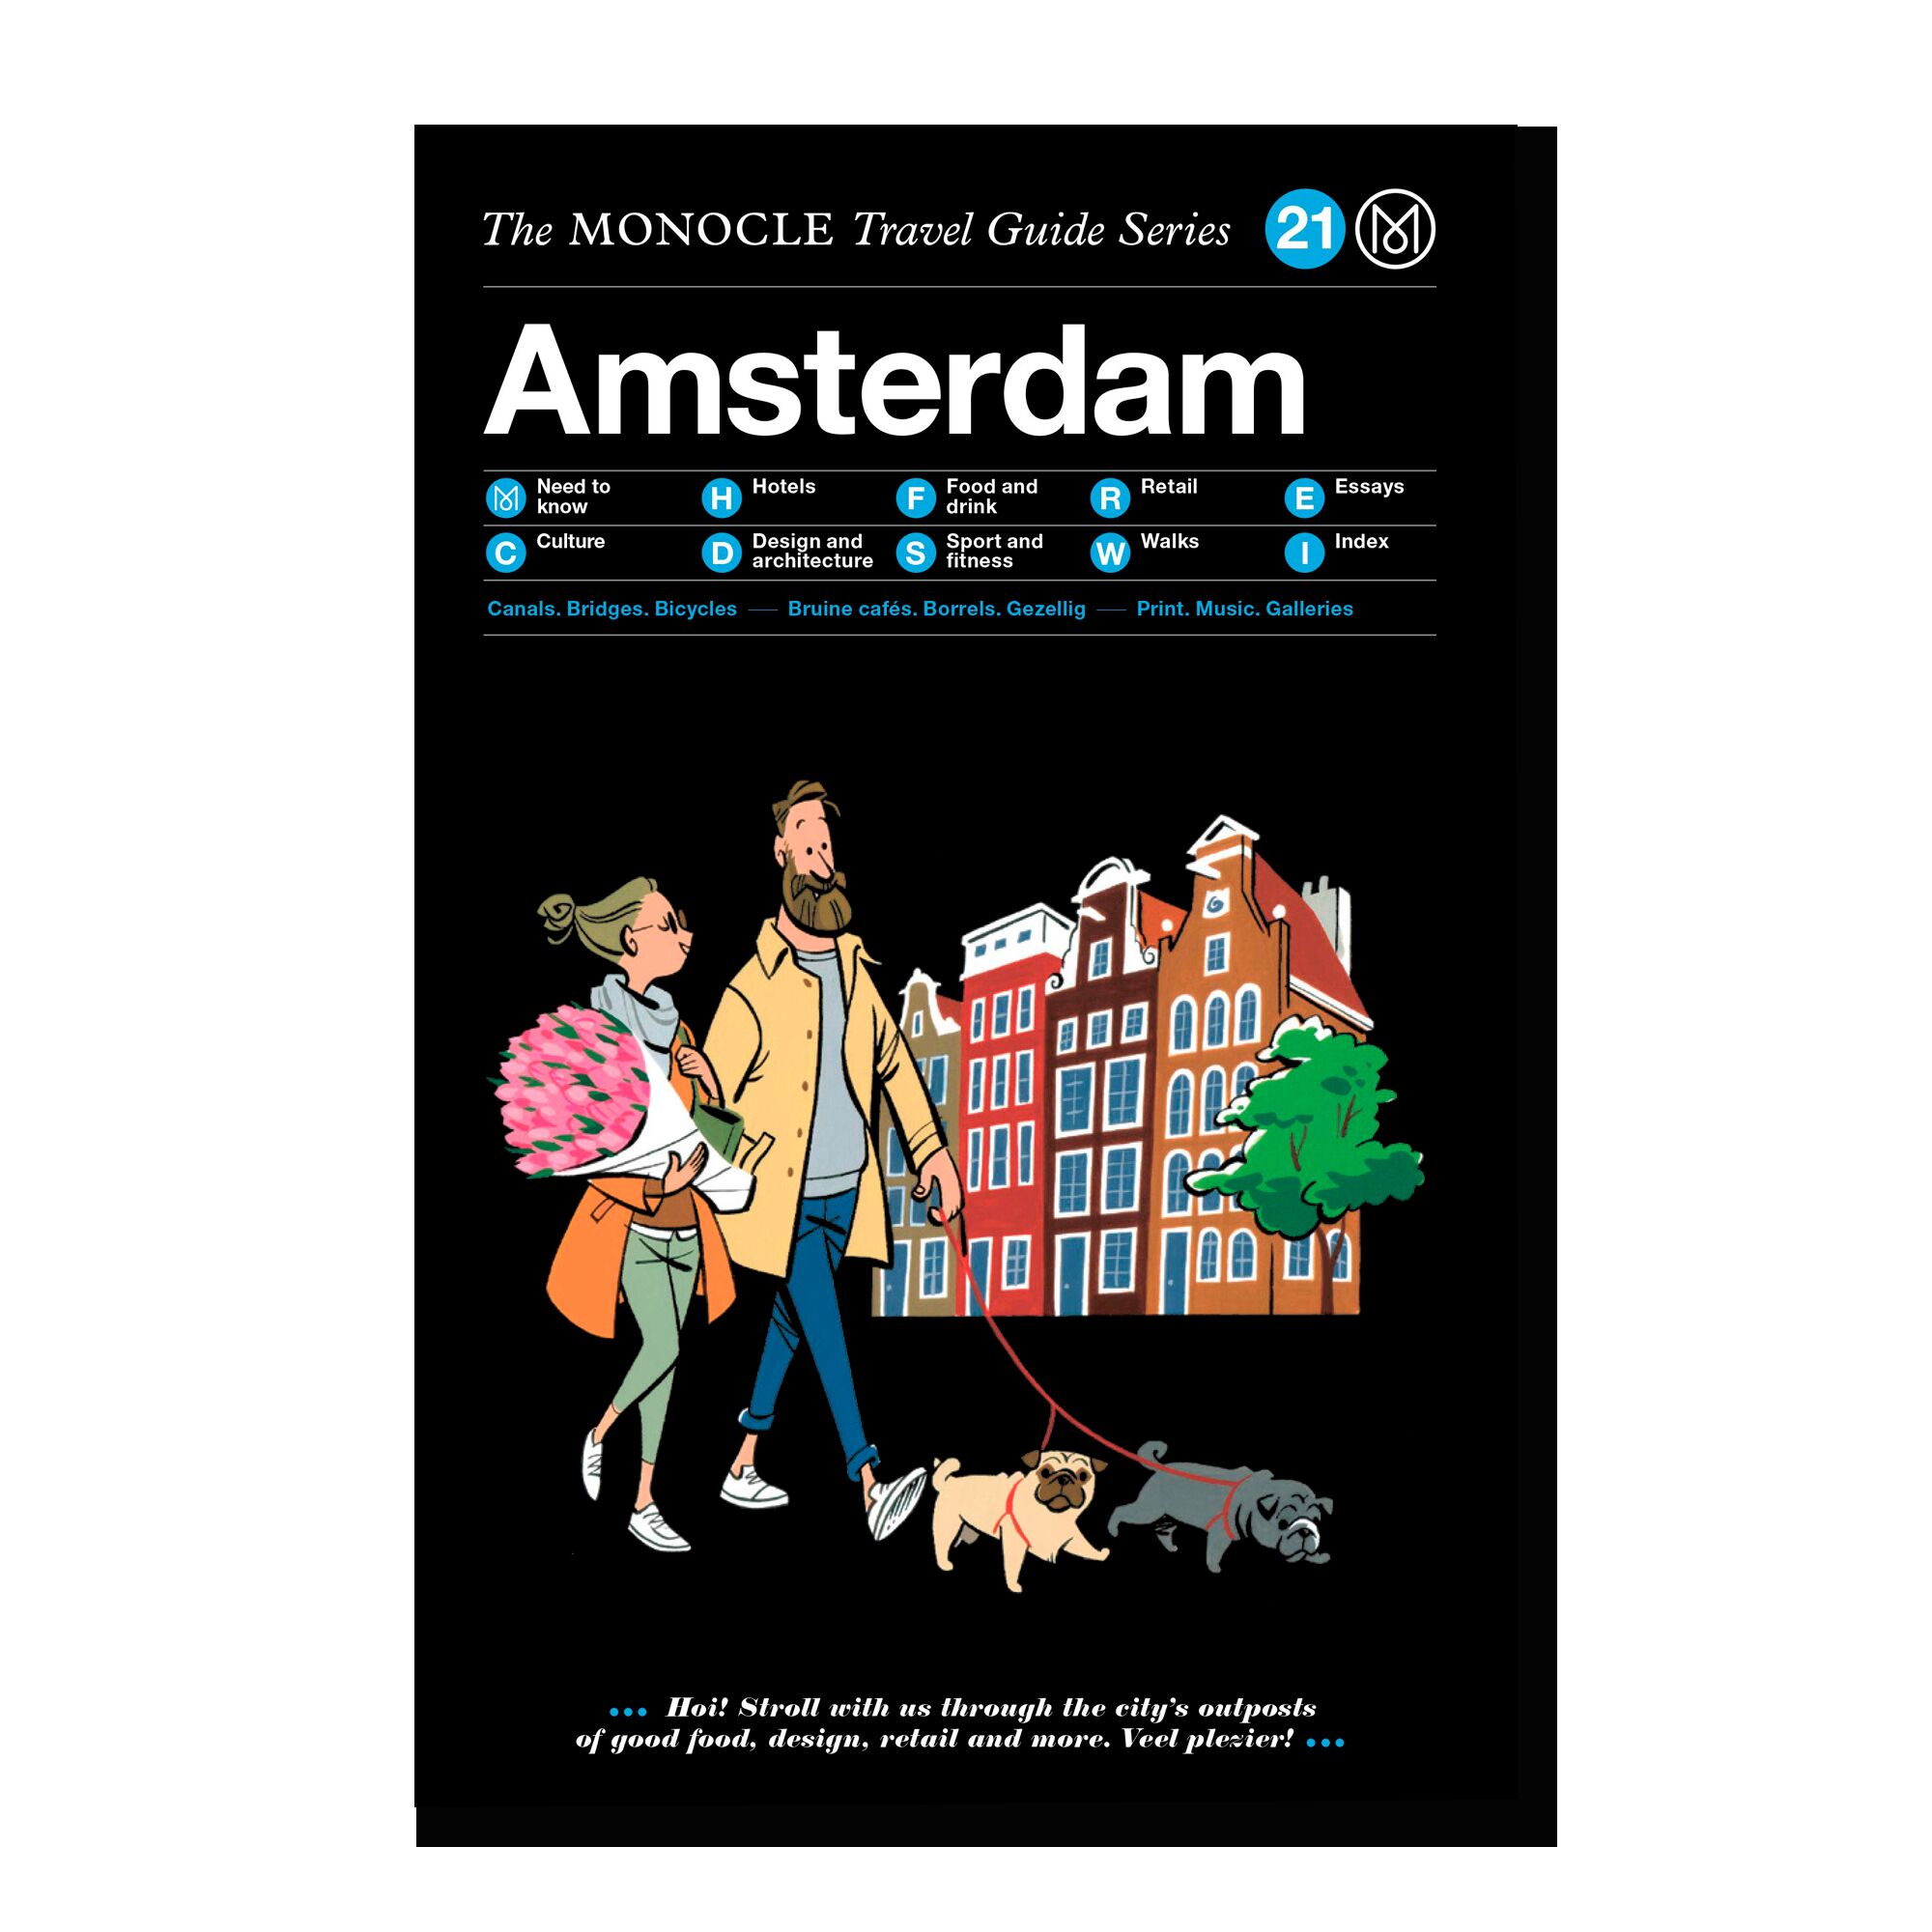 The Monocle Travel Guide to Amsterdam